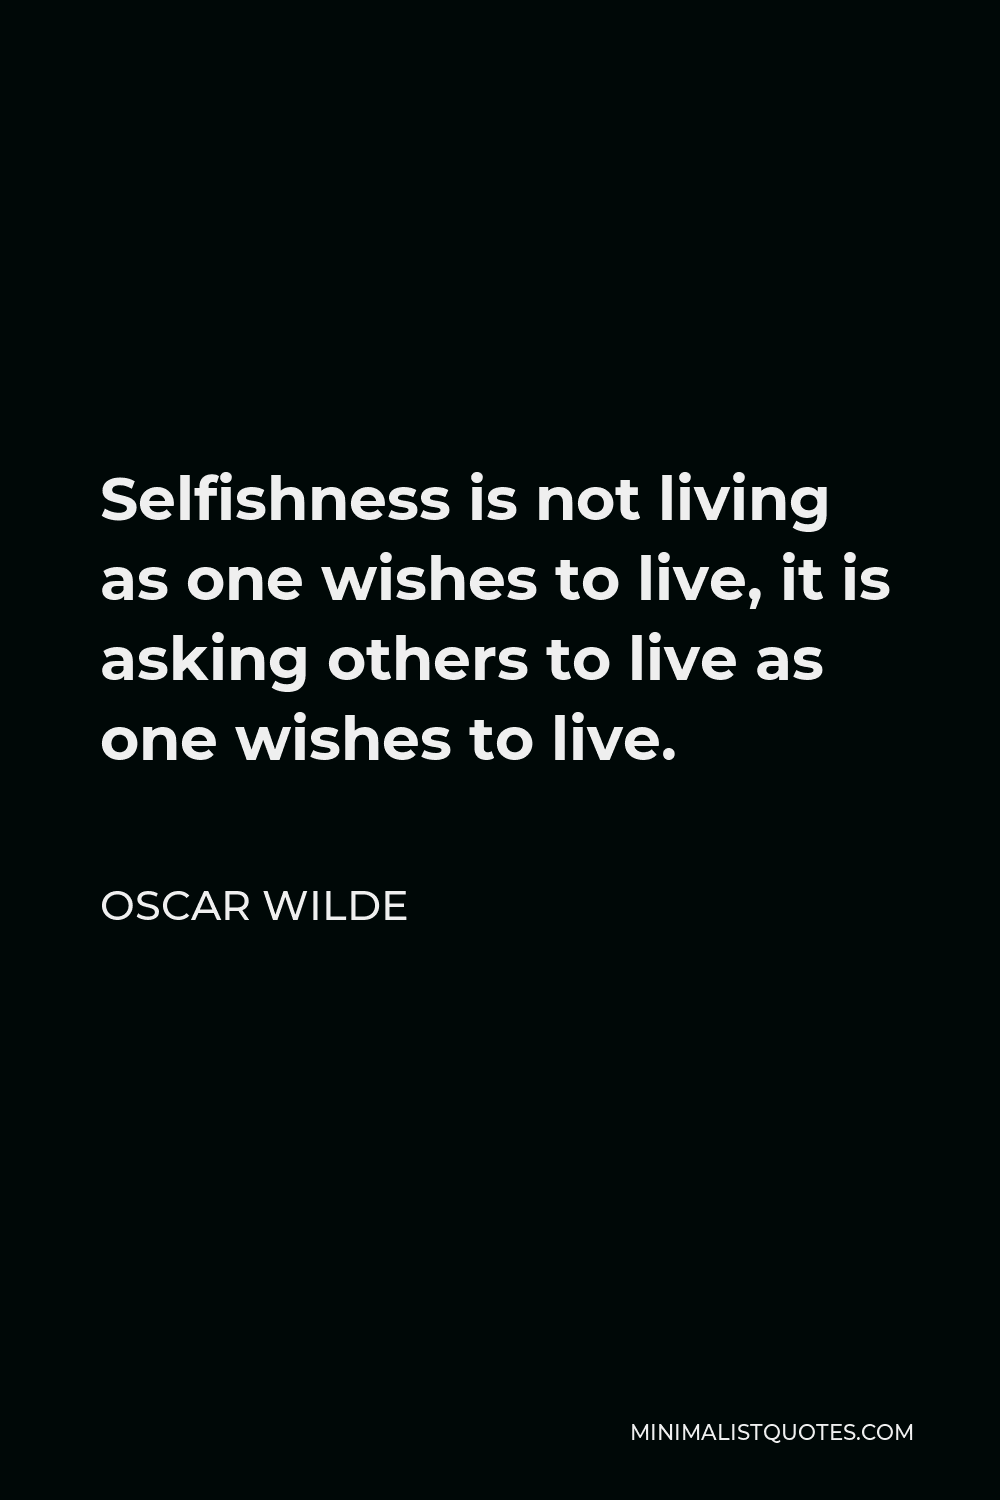 Oscar Wilde Quote - Selfishness is not living as one wishes to live, it is asking others to live as one wishes to live.